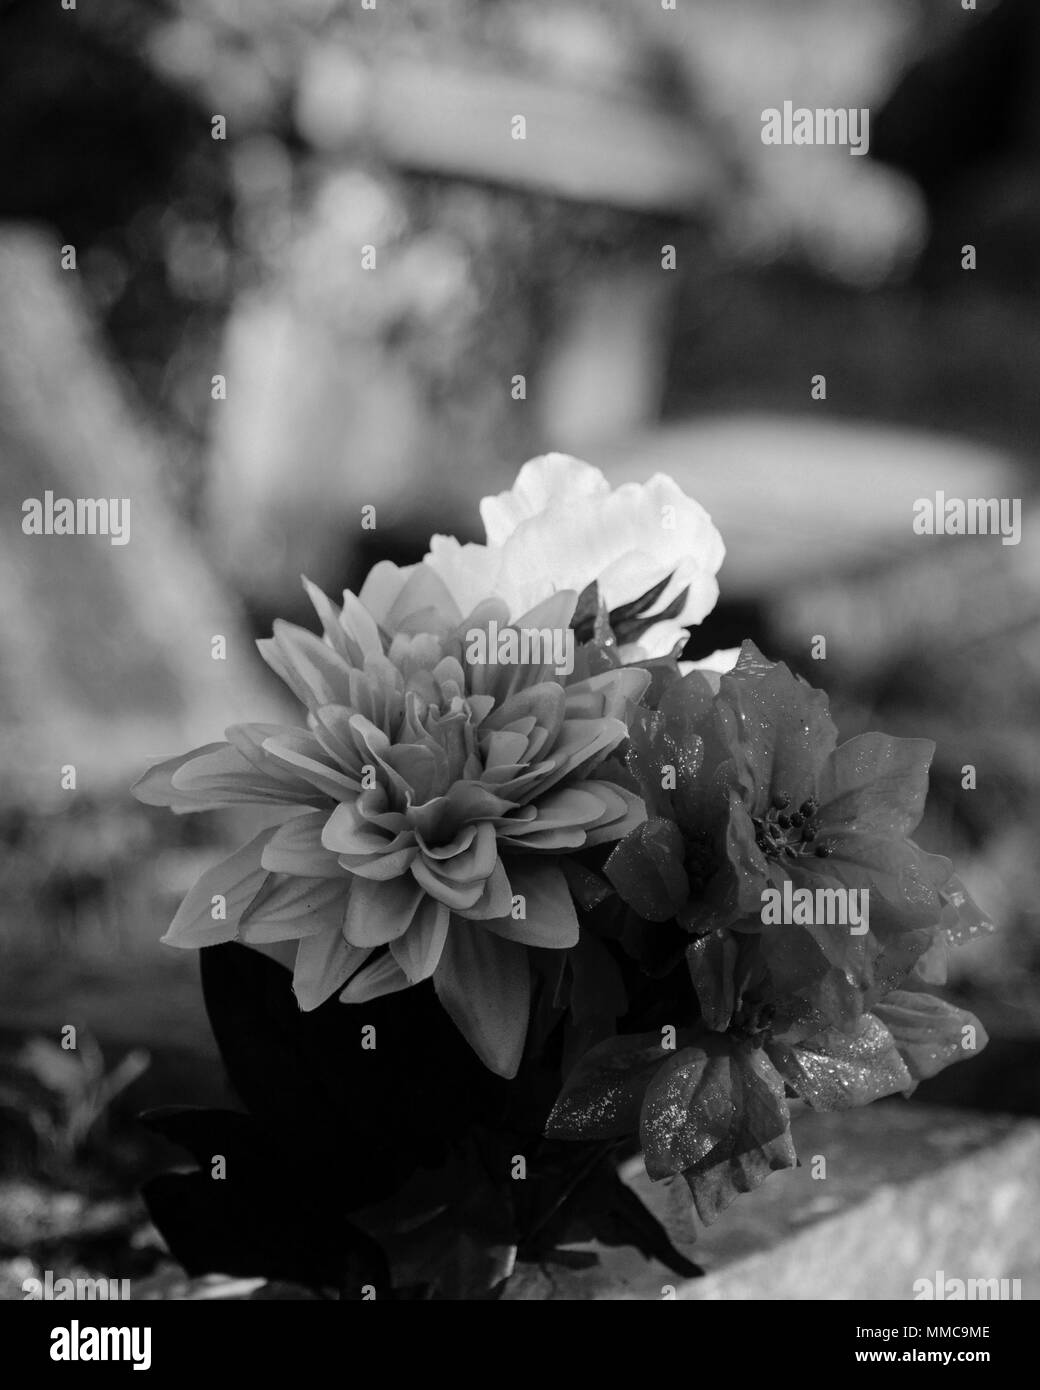 Artificial flowers decorate the grave of the dearly departed dead relative at London's famous Kensal Green Cemetery, sad funerals, dead people, black. Stock Photo